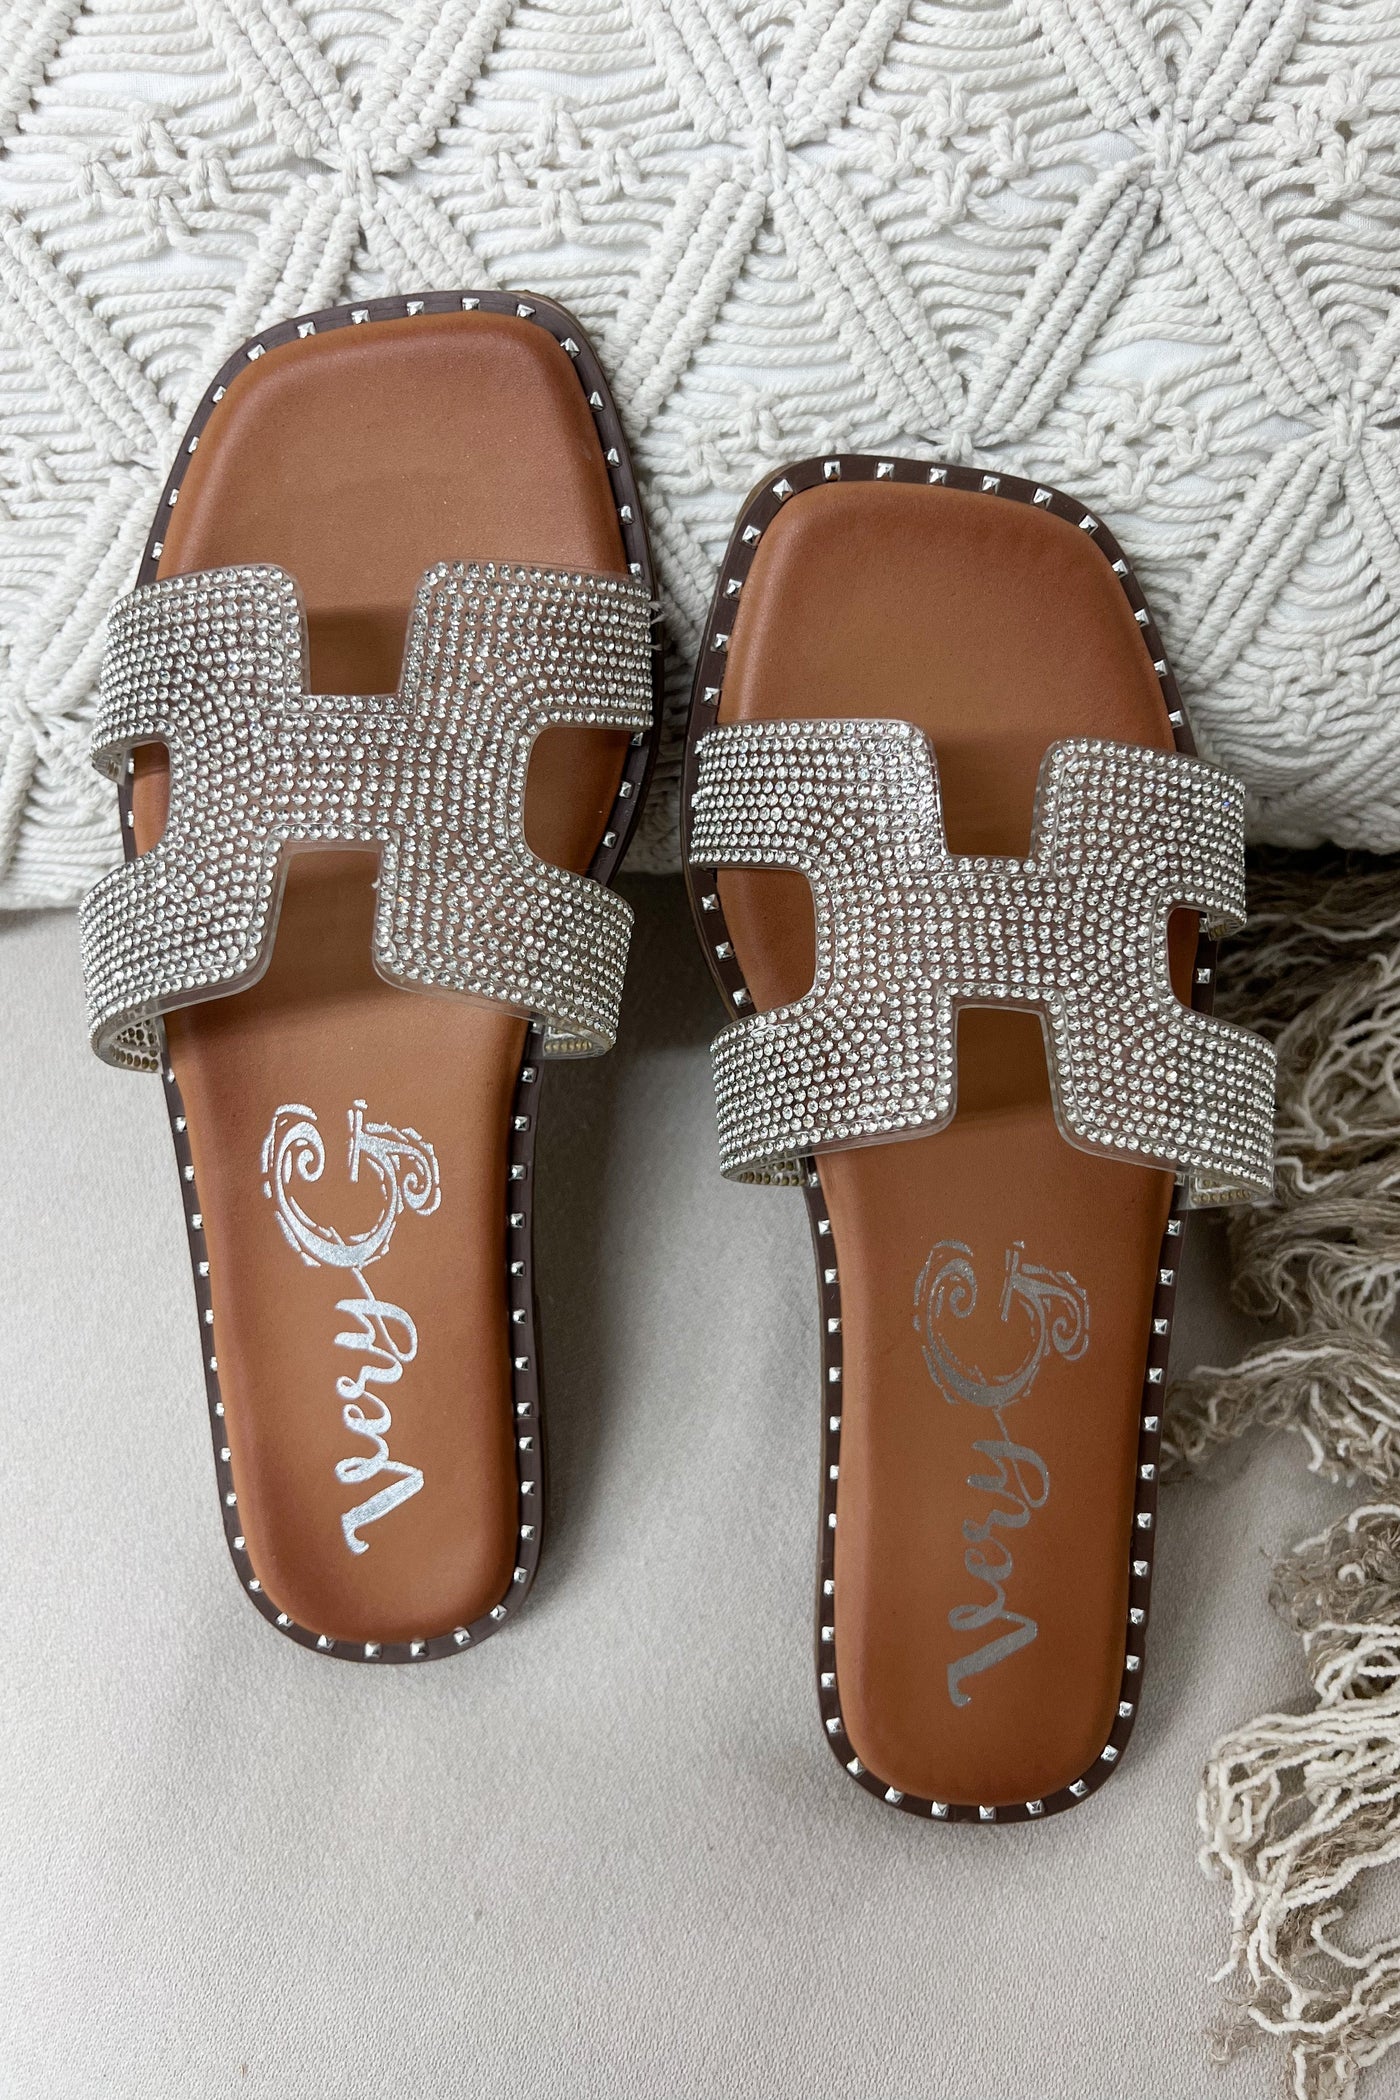 Very G H Street Sandals (Silver) - Happily Ever Aften